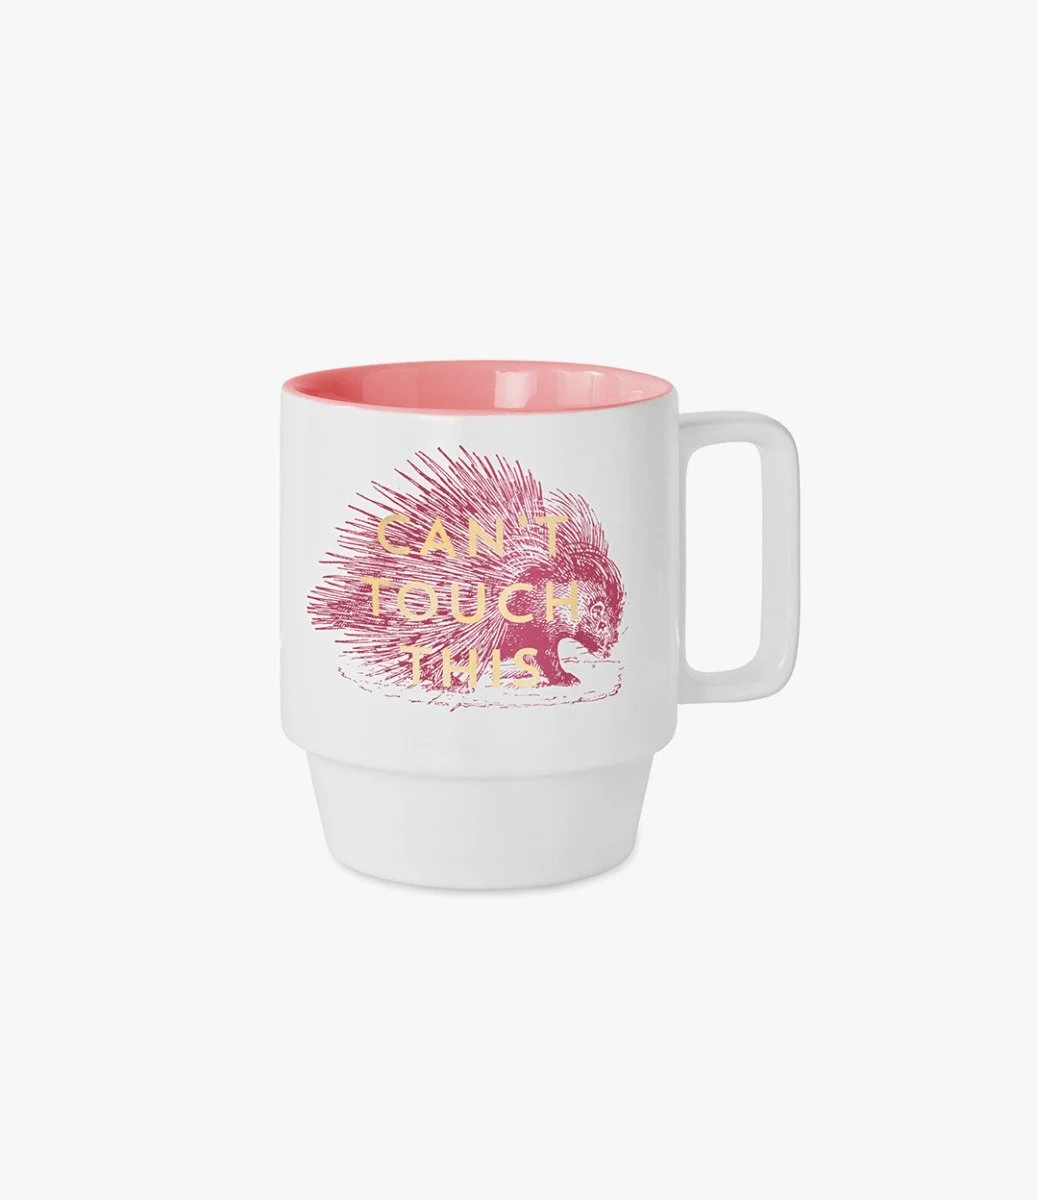 Vintage Sass - Can't Touch This Mug by Designworks Ink.